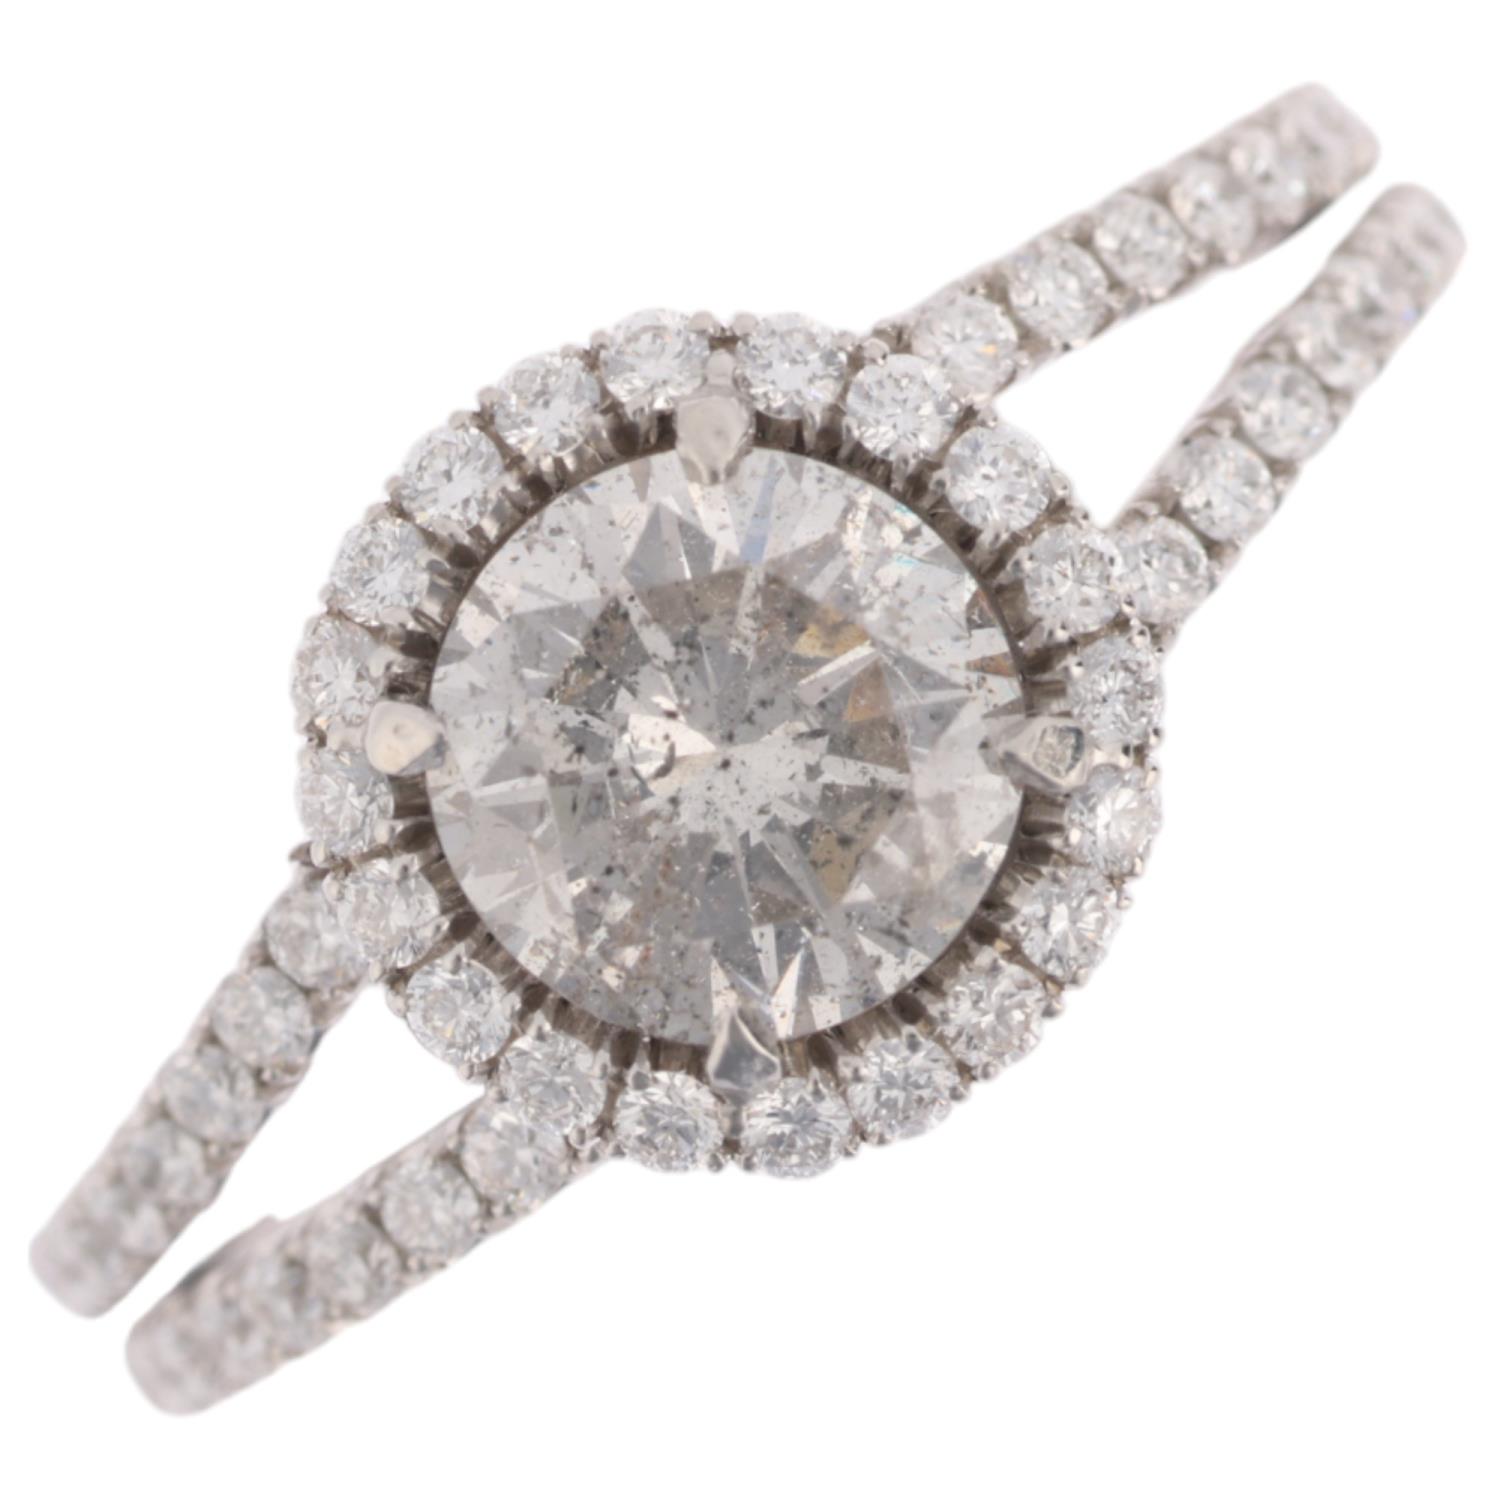 A modern diamond halo cluster ring, centrally set with 1ct modern round brilliant-cut diamond